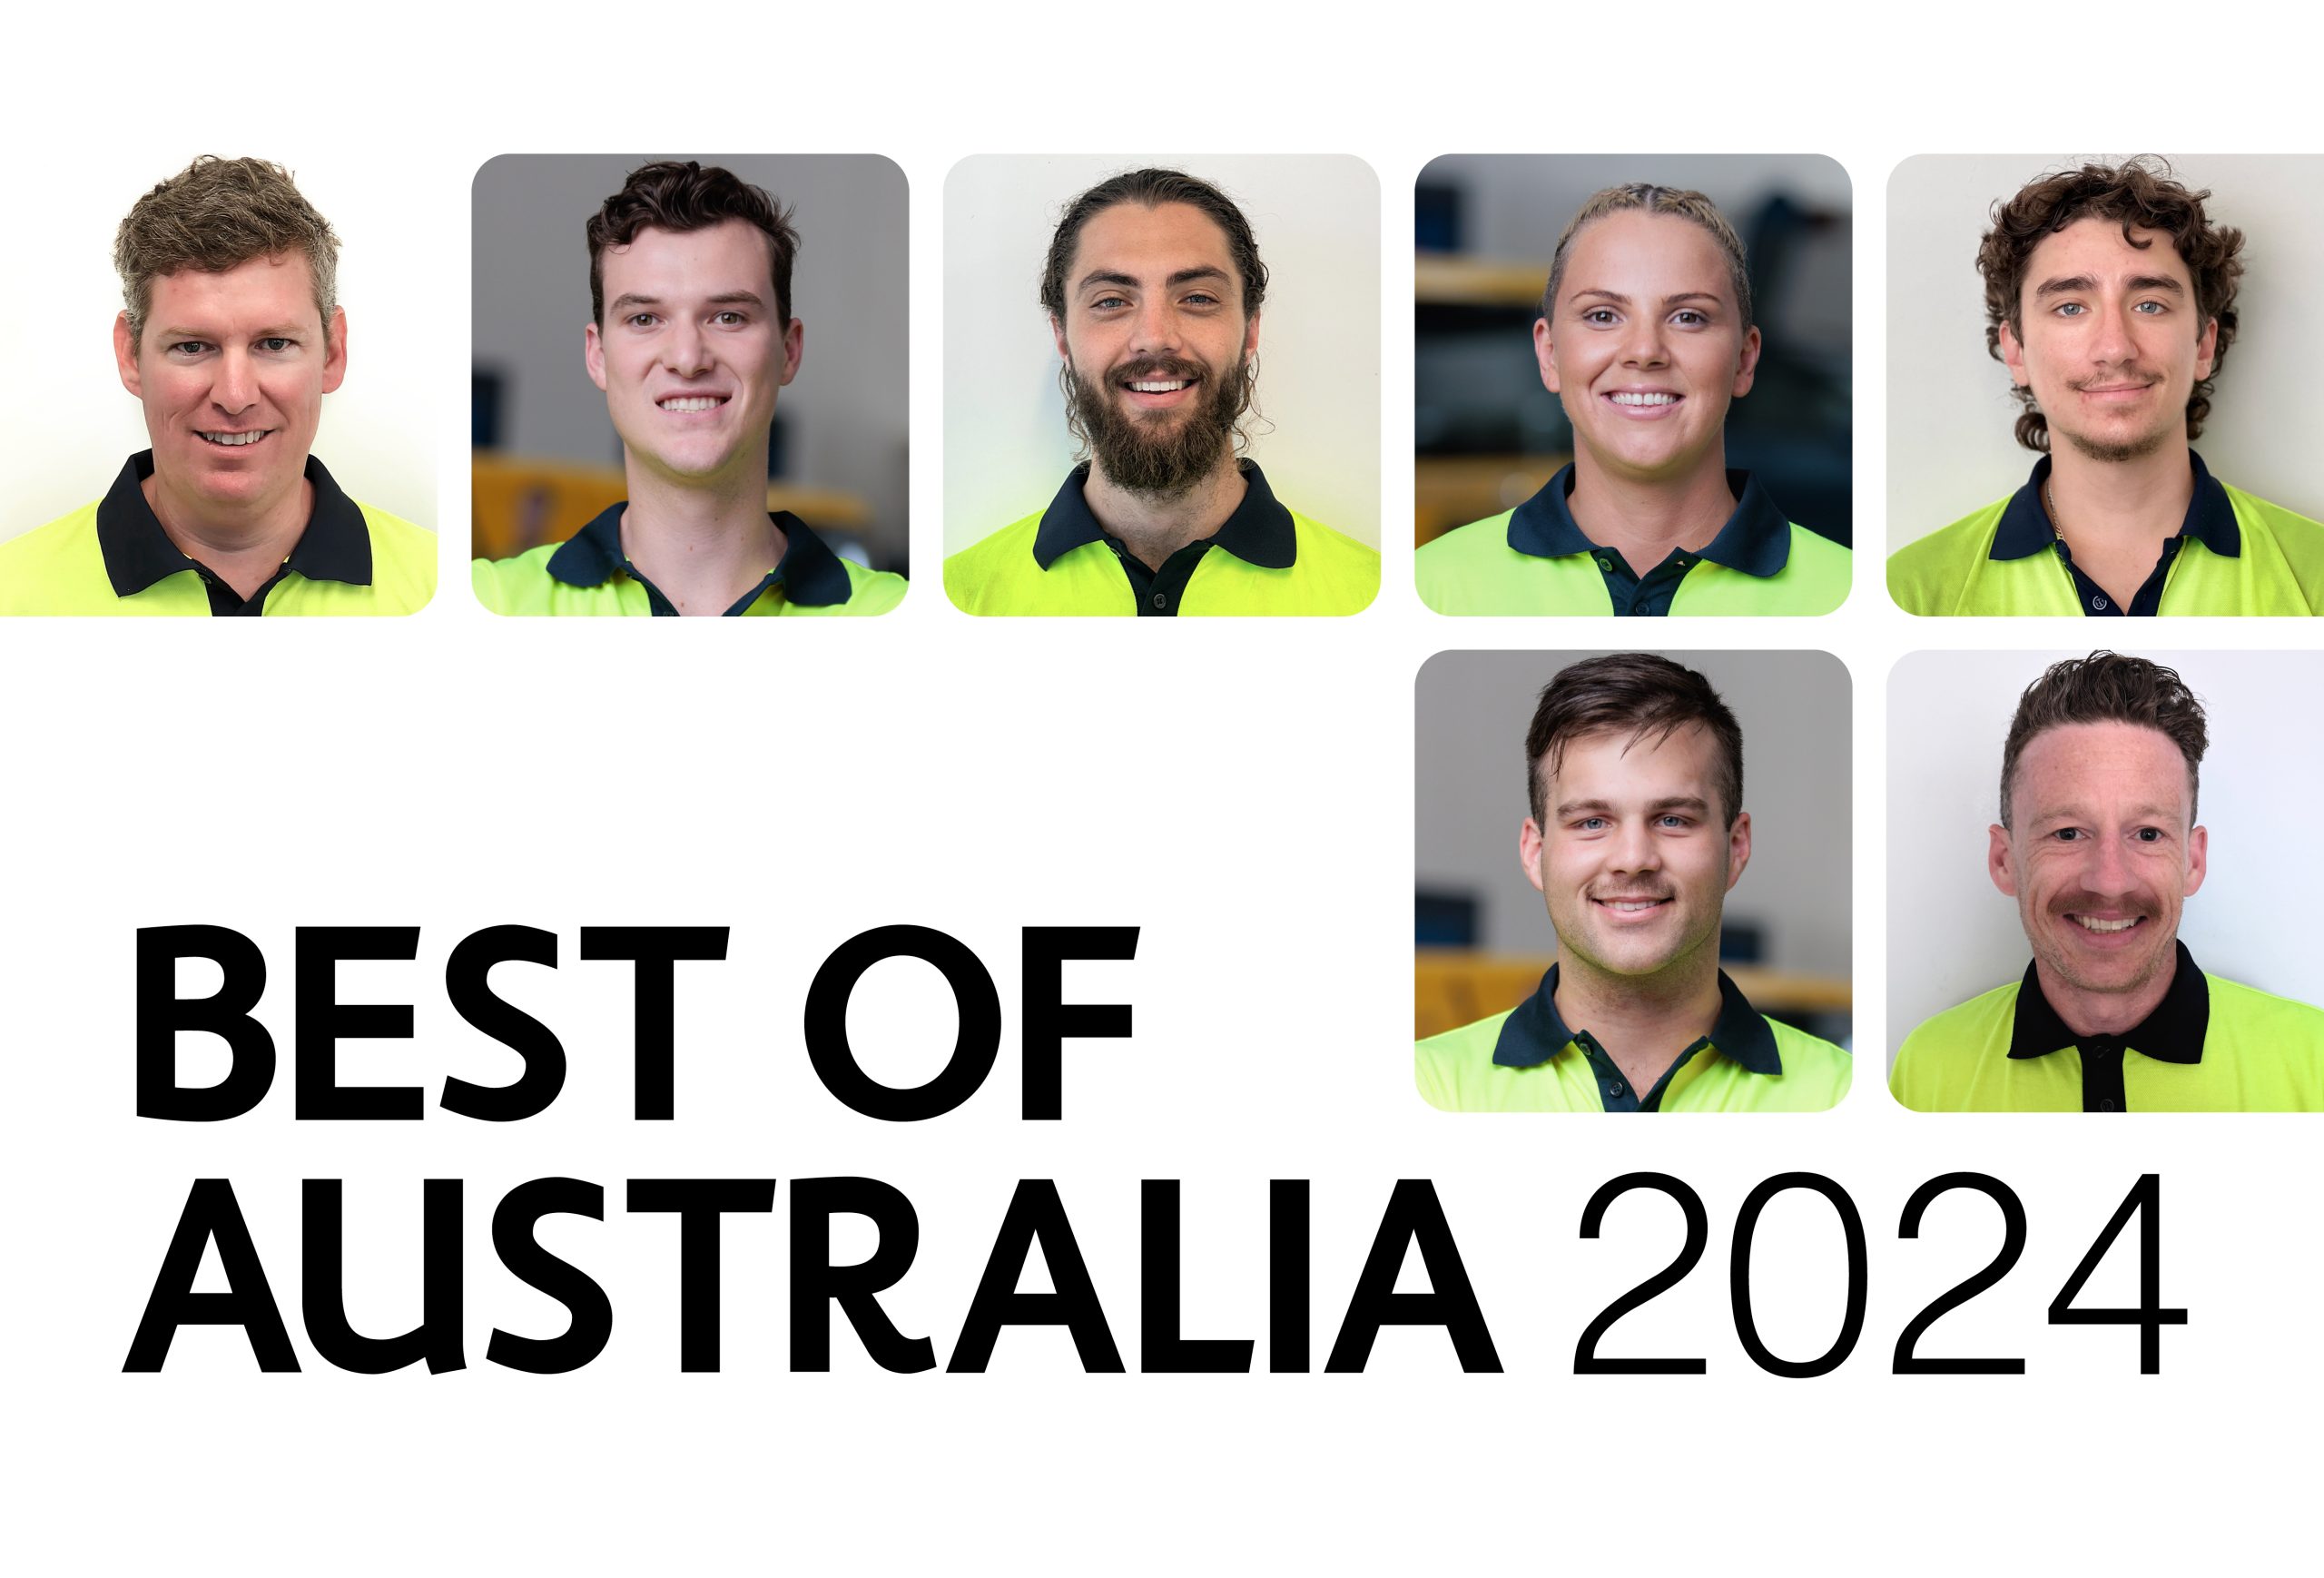 Gearing Up for O’Brien® Best of Australia 2024